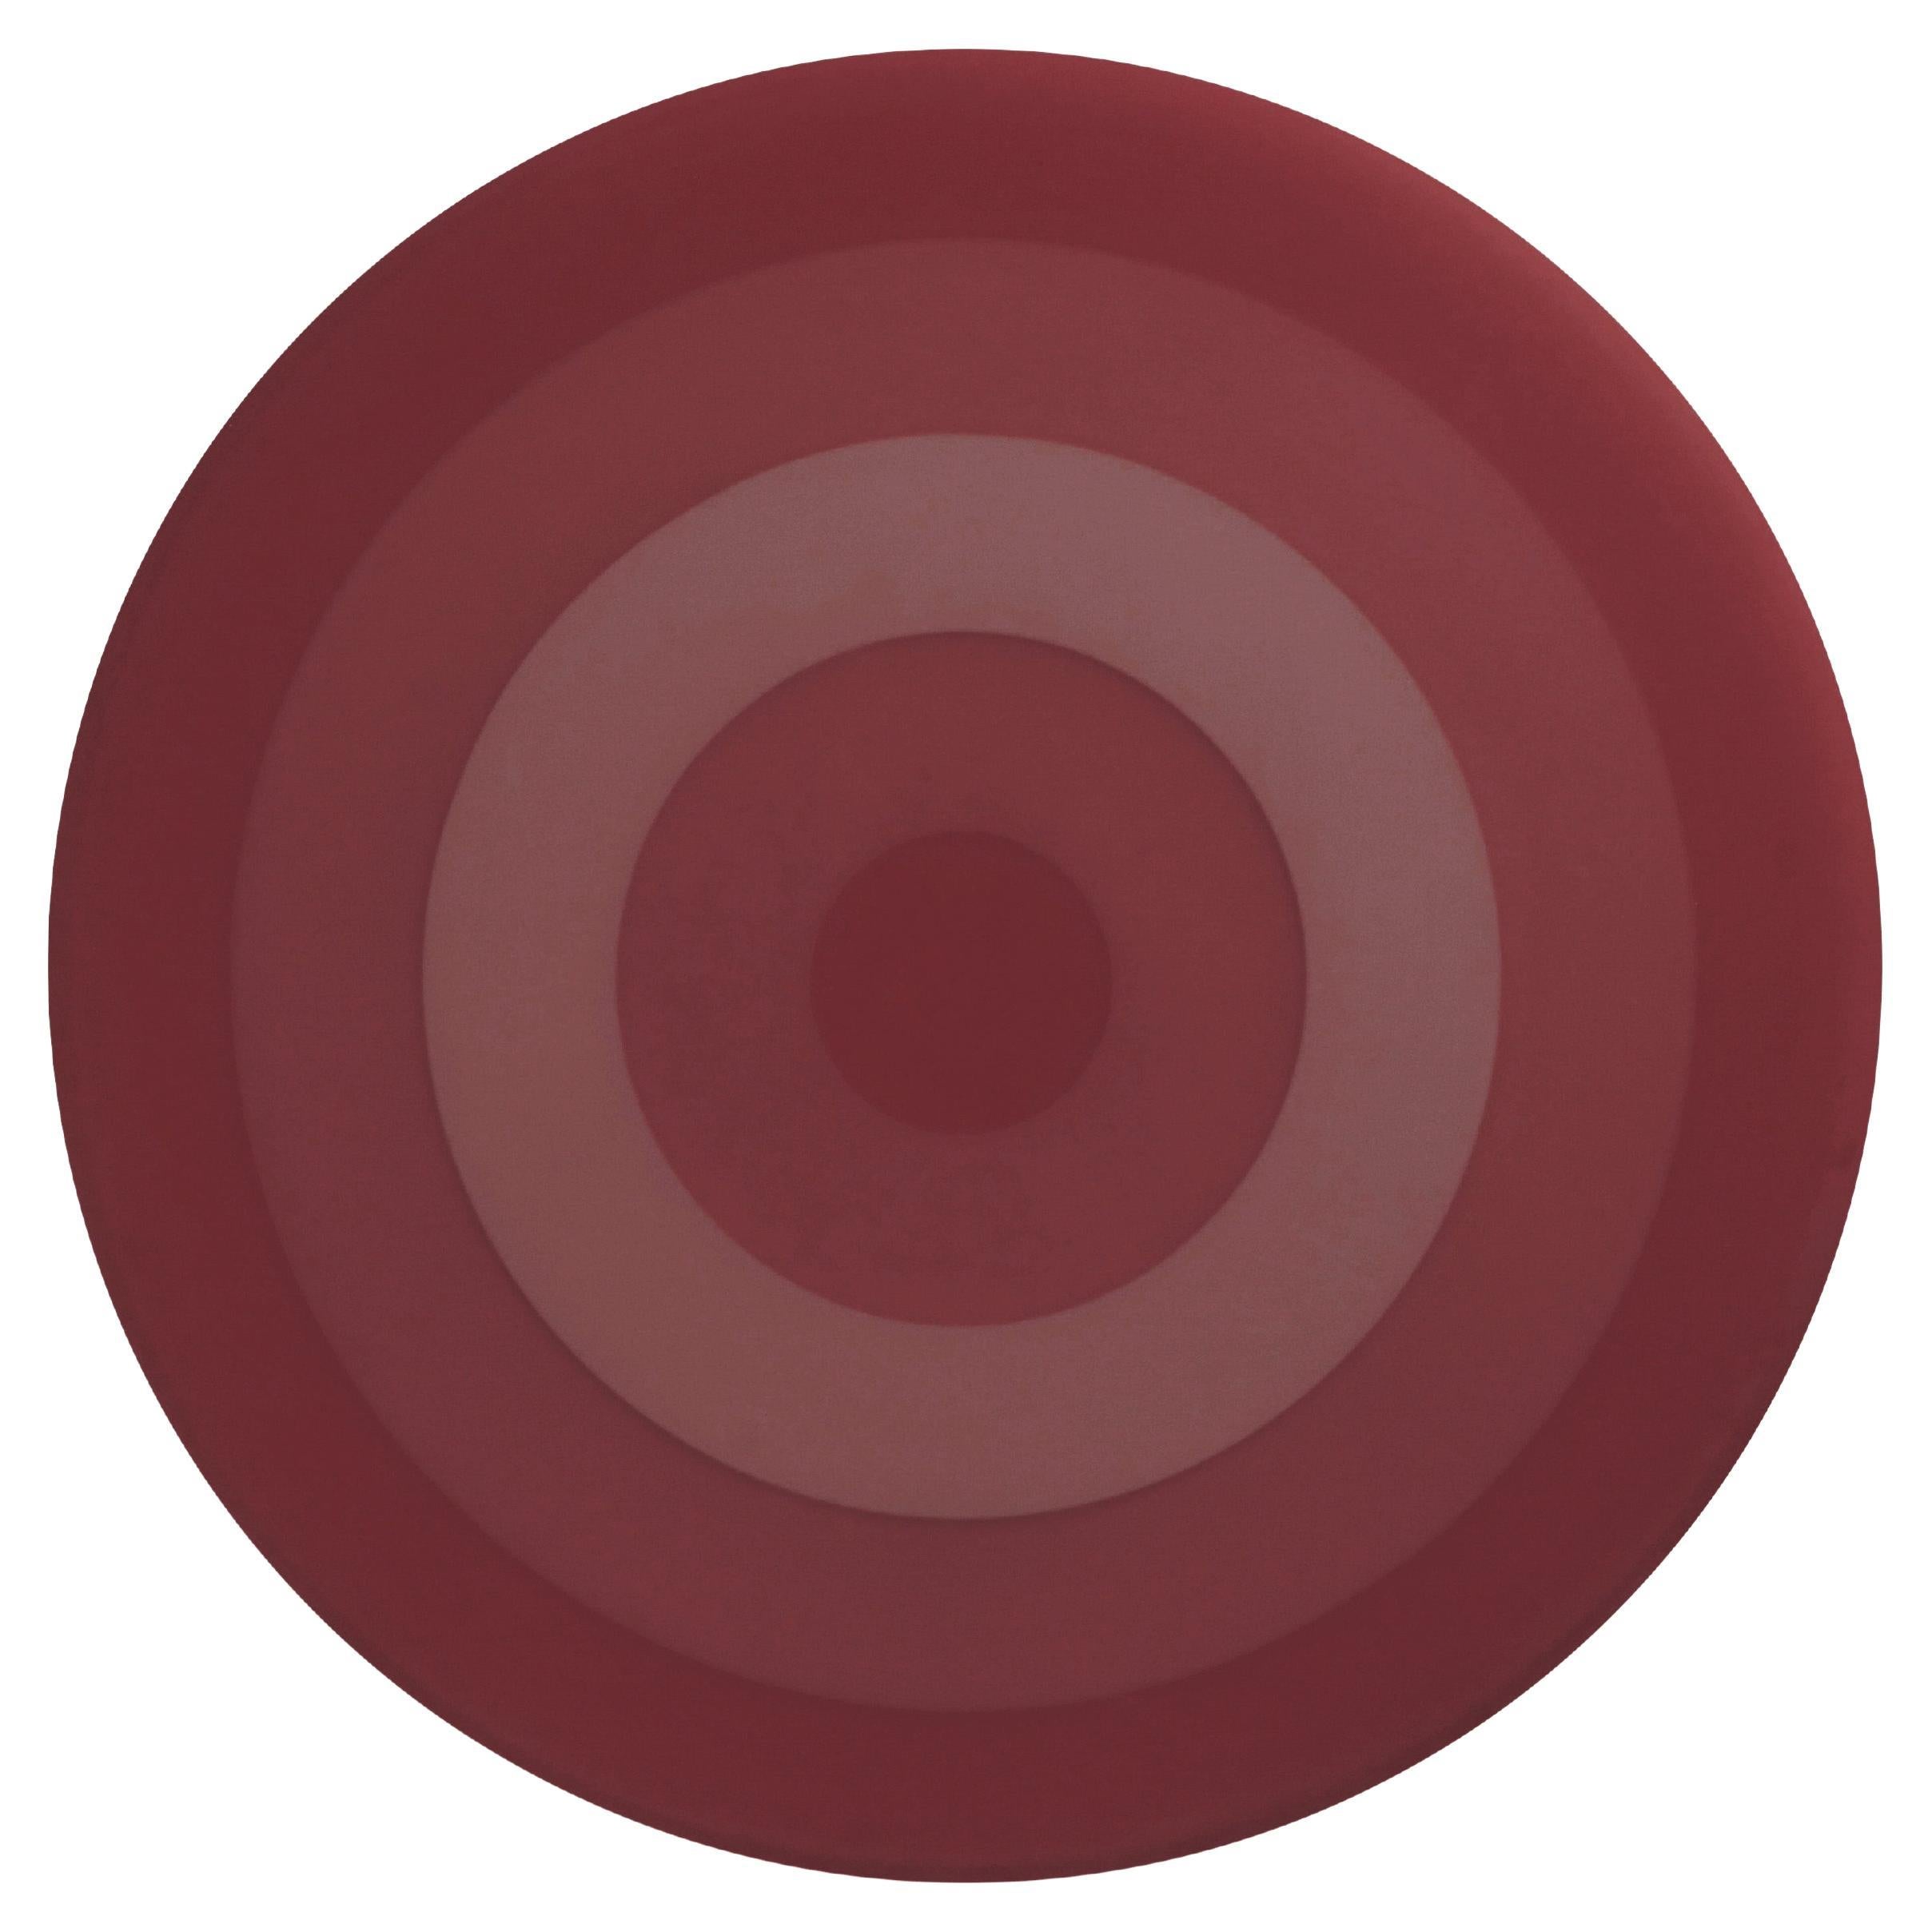 Scale Rings Resin Wall Decor In Burgundy by Facture, REP by Tuleste Factory For Sale